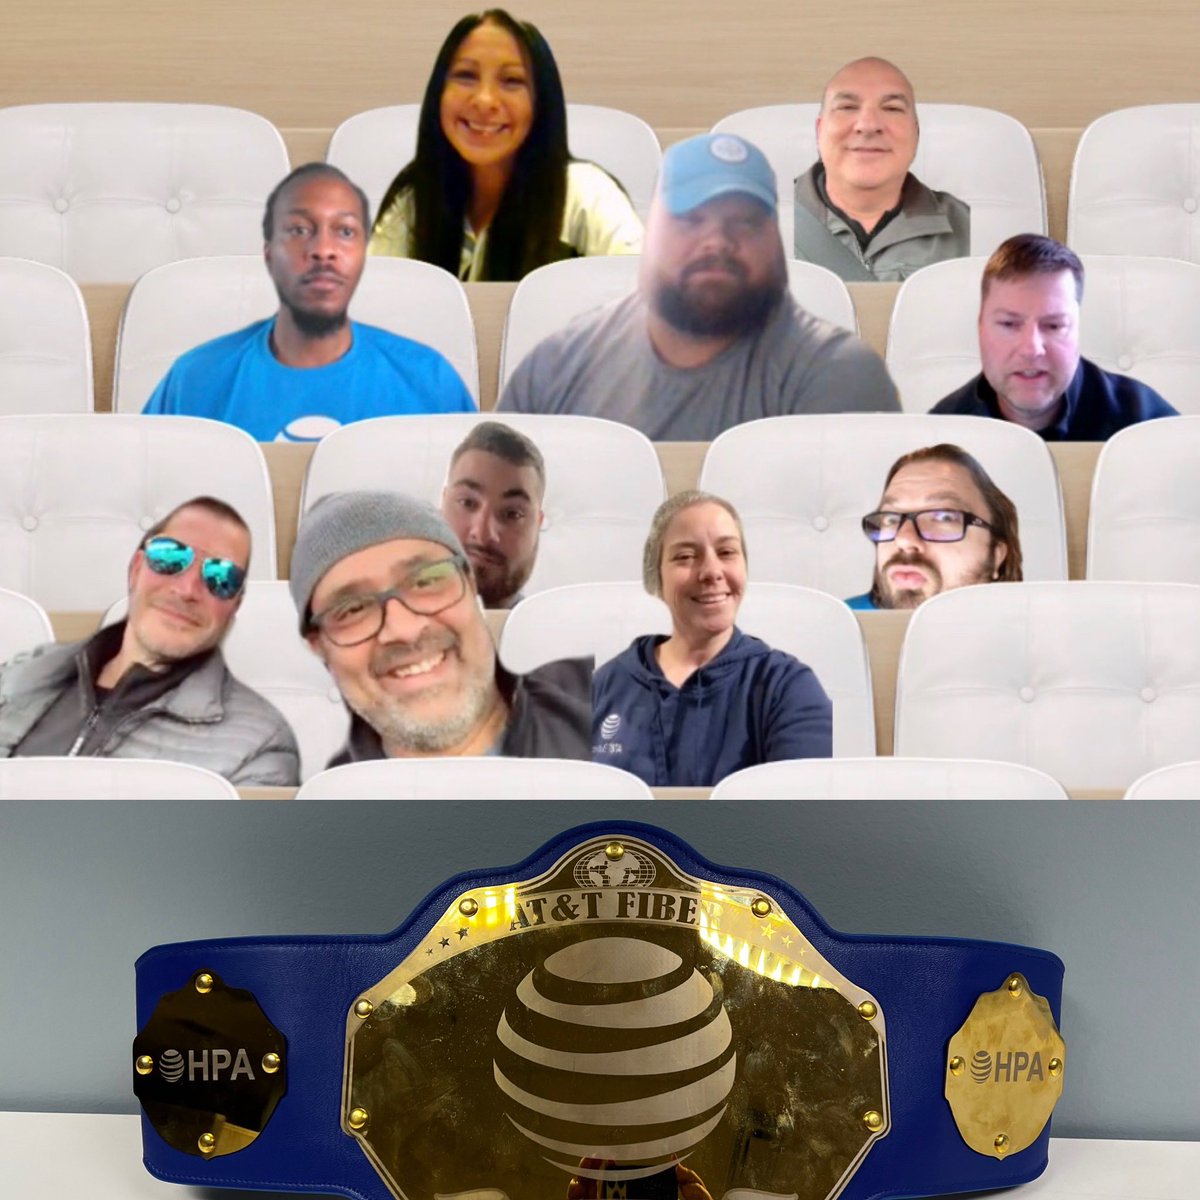 Congratulations to William Dulaney & his team for taking January’s # 1 spot in OHPA’s Business Fiber team! @_Shelley_G @ATT @eyeofthe_FIBER